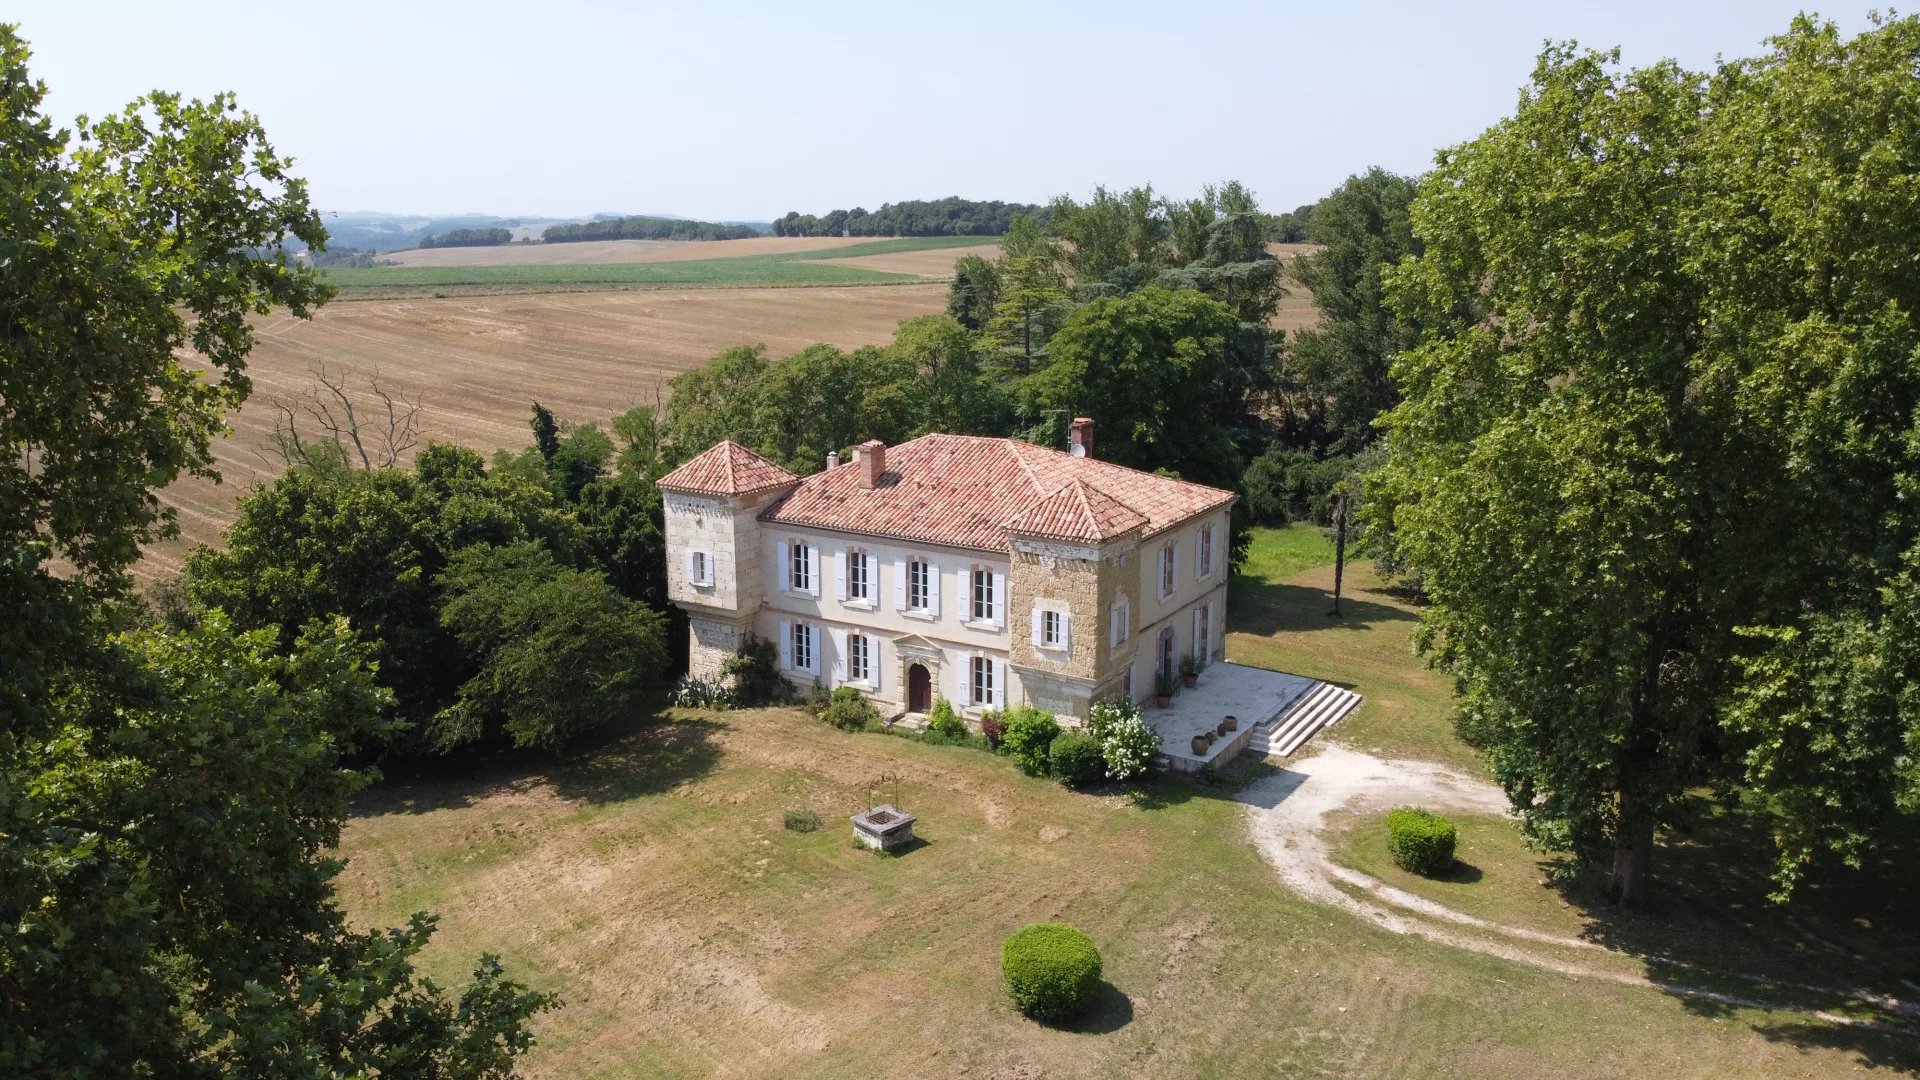 Charismatic small chateau in complete privacy